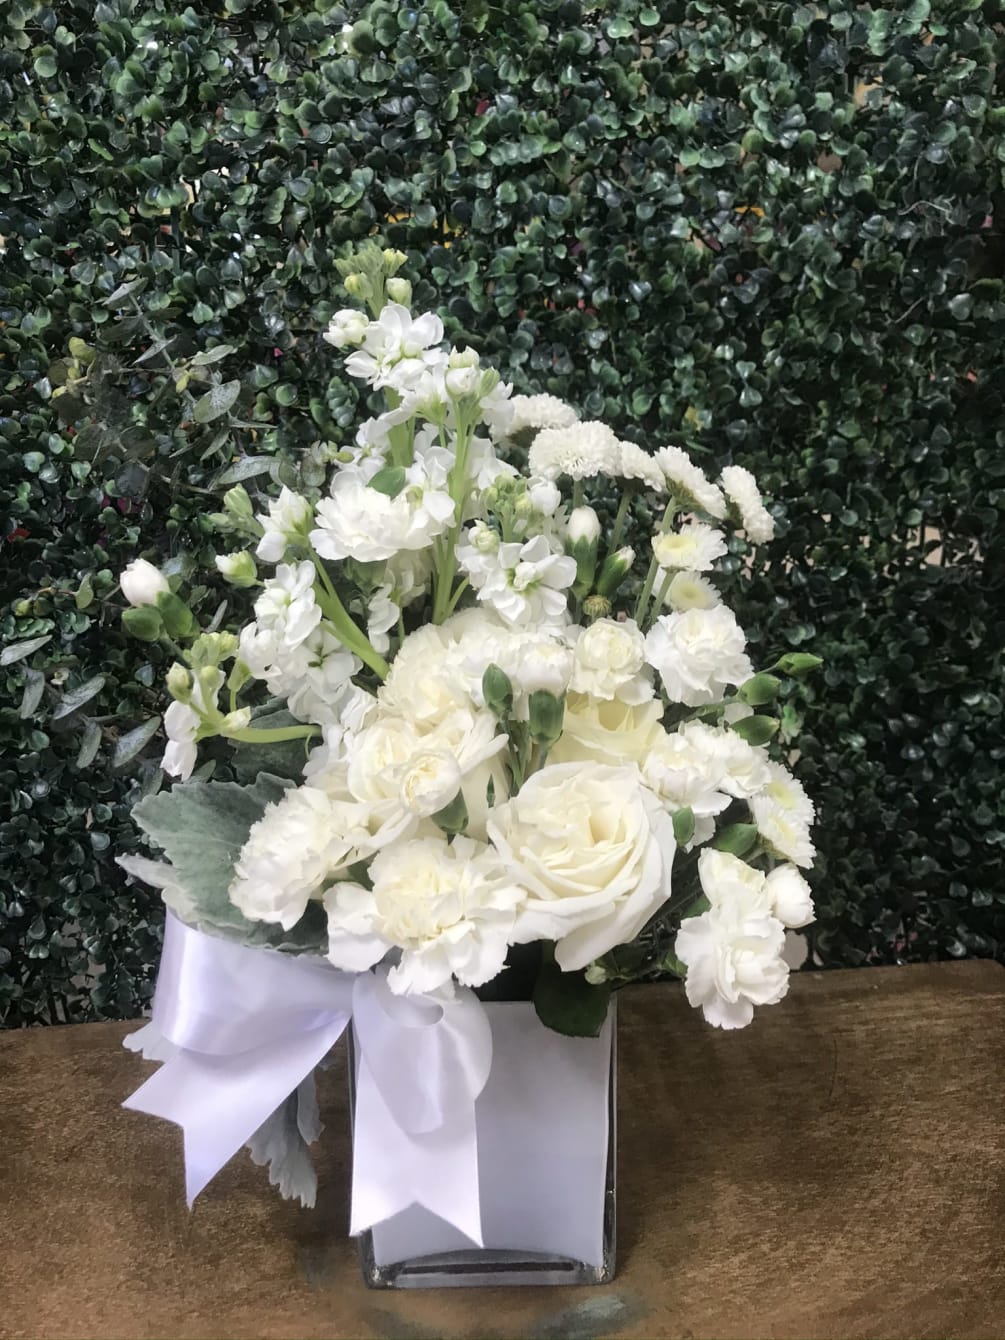 All white flowers gracefully arranged in a white cube to give peace